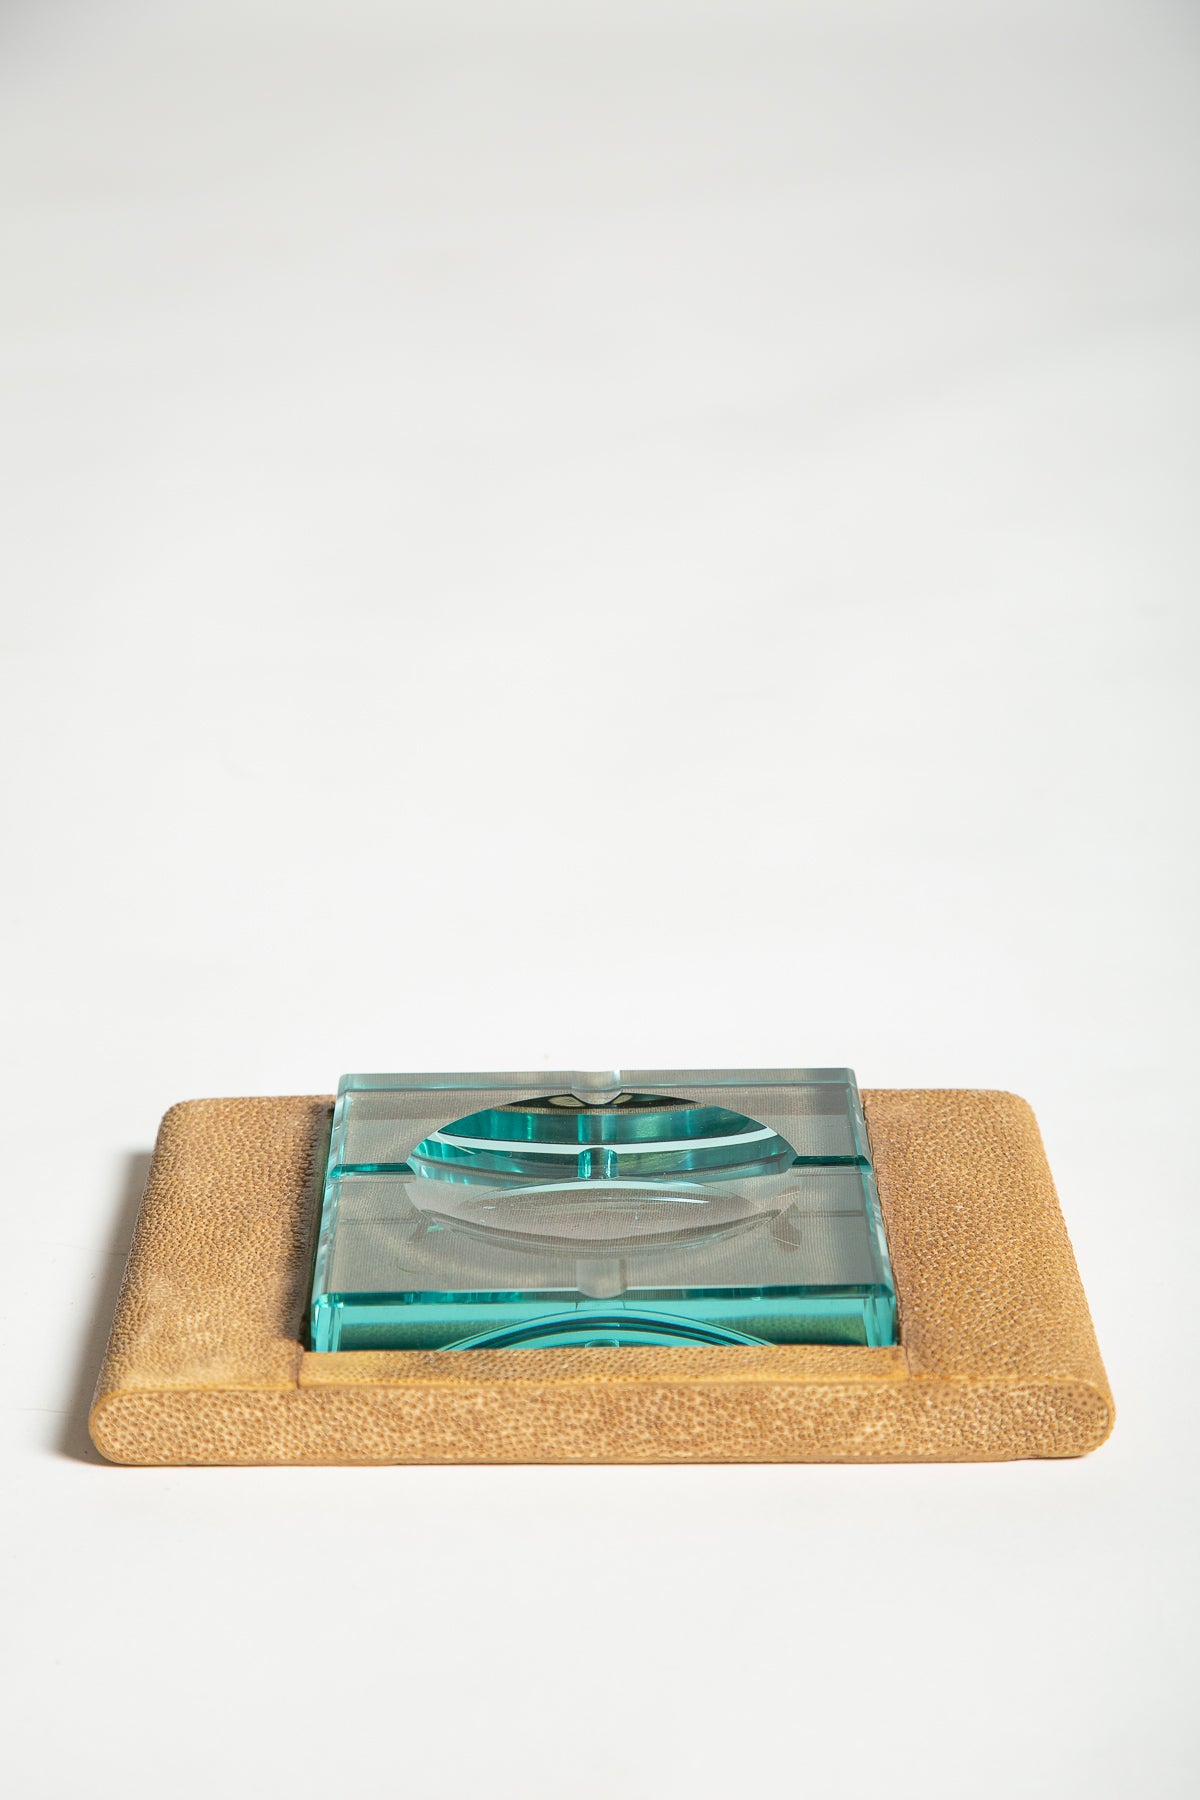 MAXFIELD PRIVATE COLLECTION | GALUCHAT LEATHER ASHTRAY HOLDER